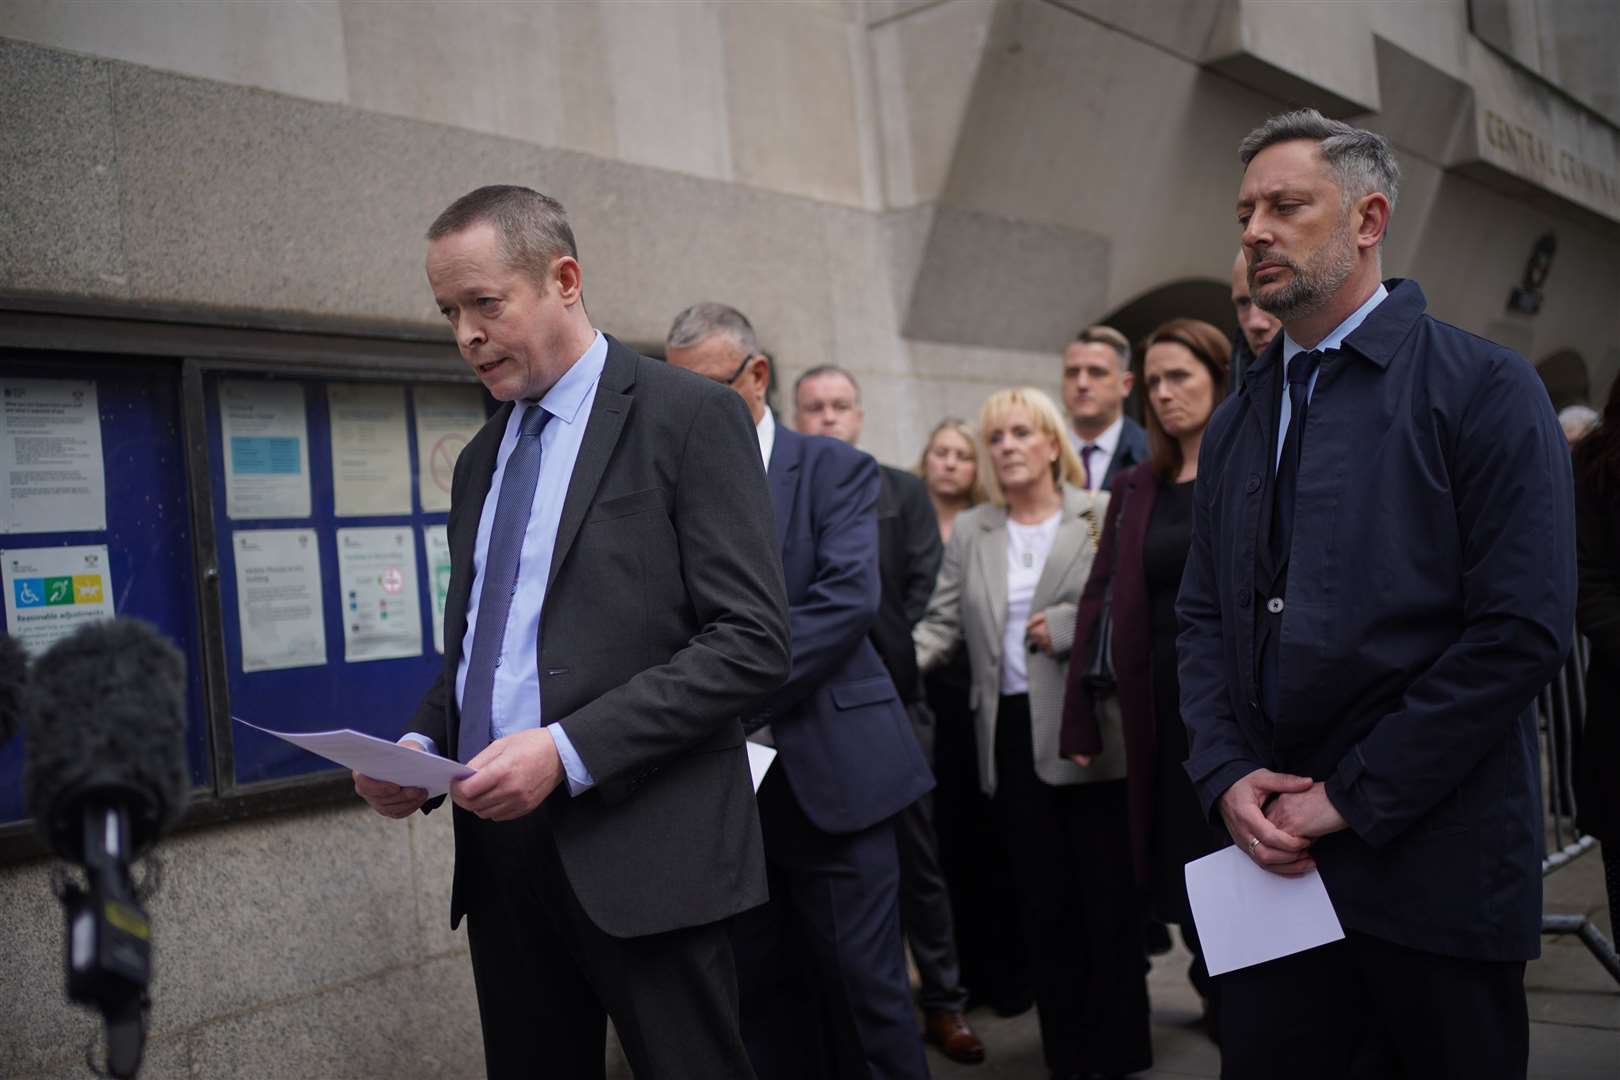 Andrew Wails the brother of Reading terror attack victim Dr David Wails, issues a statement (Yui Mok/PA)